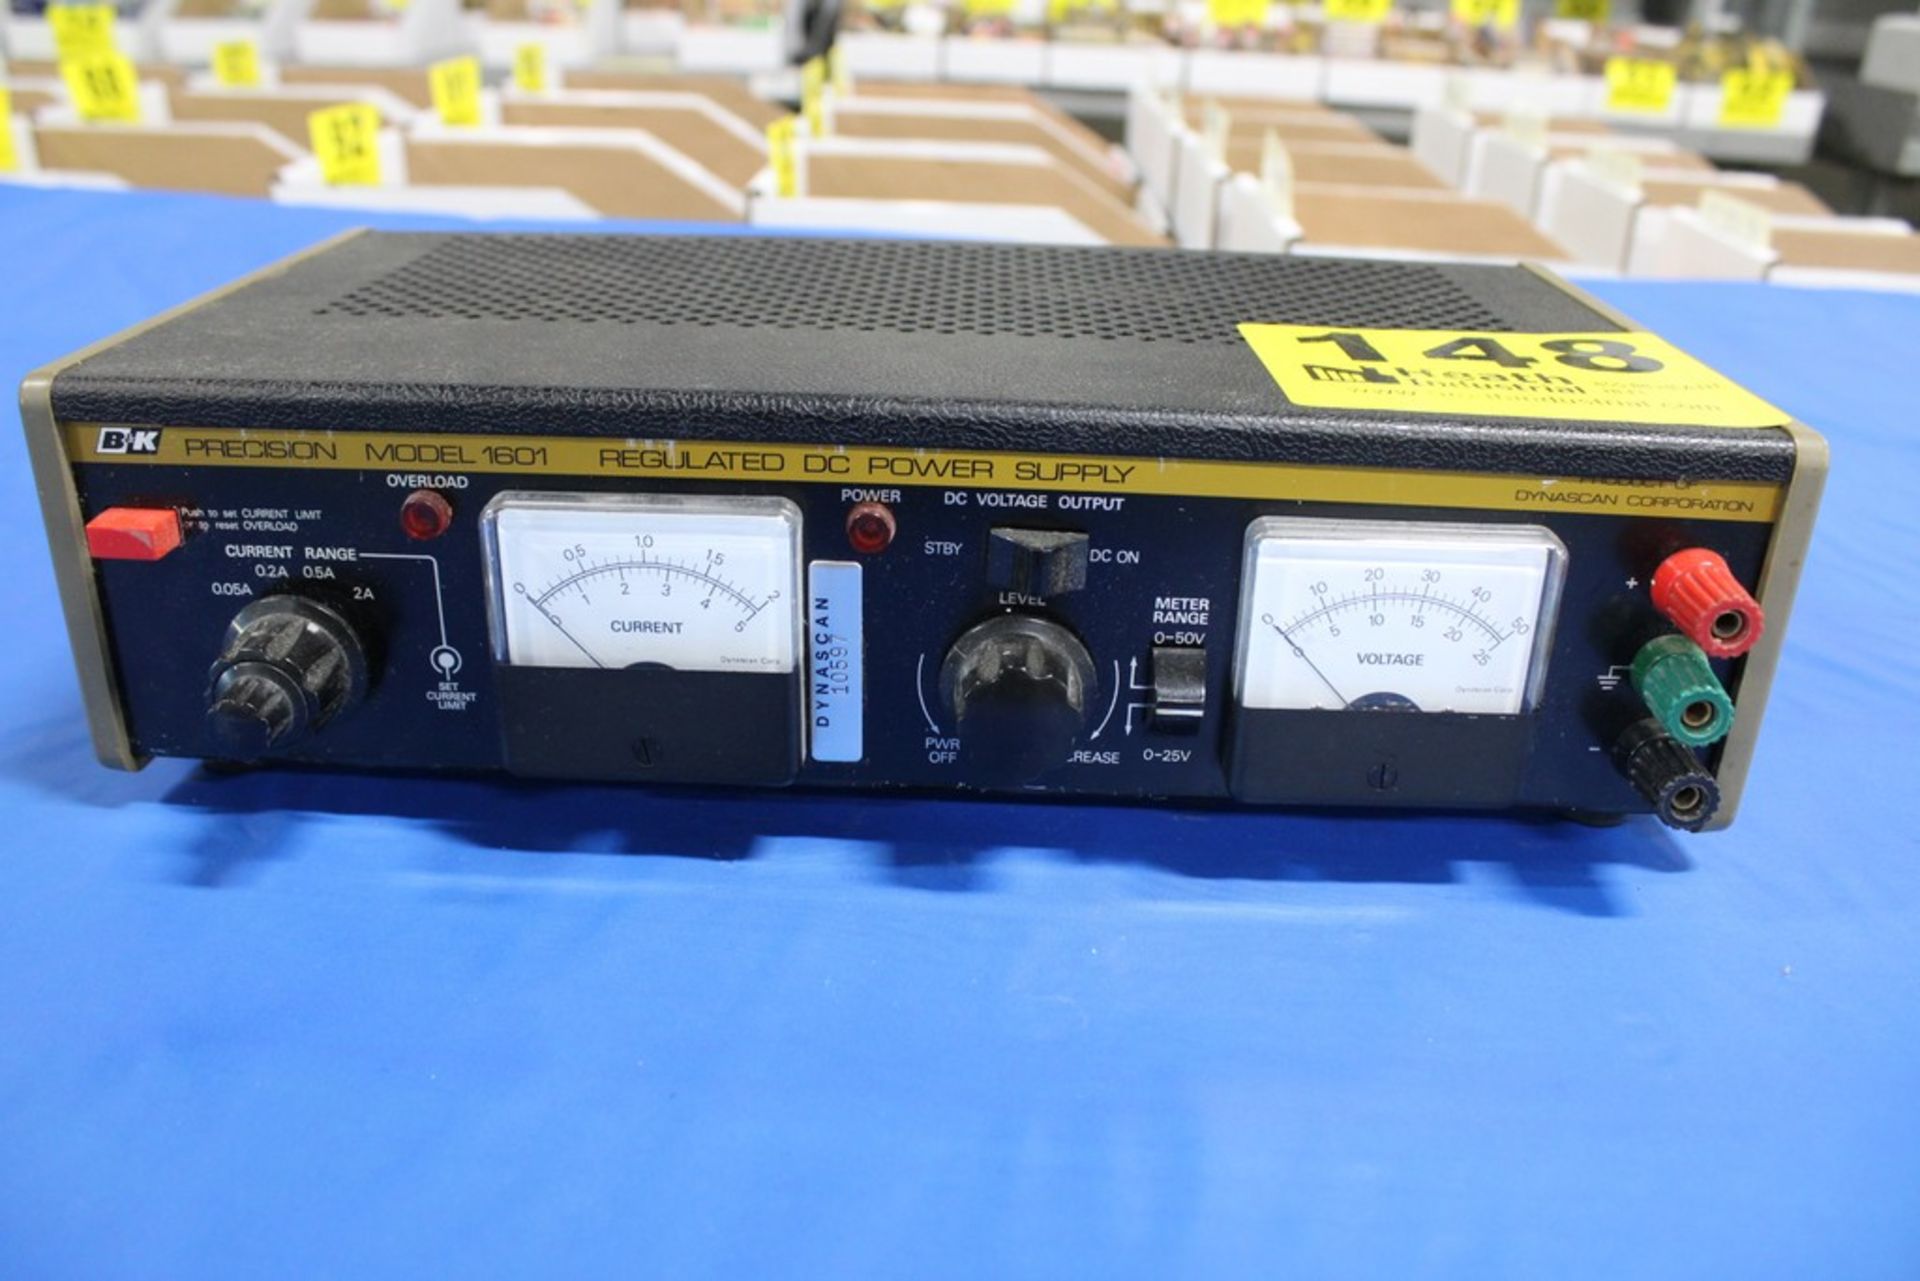 BK PRECISION MODEL 1601 REGULATED DC POWER SUPPLY - Image 2 of 3